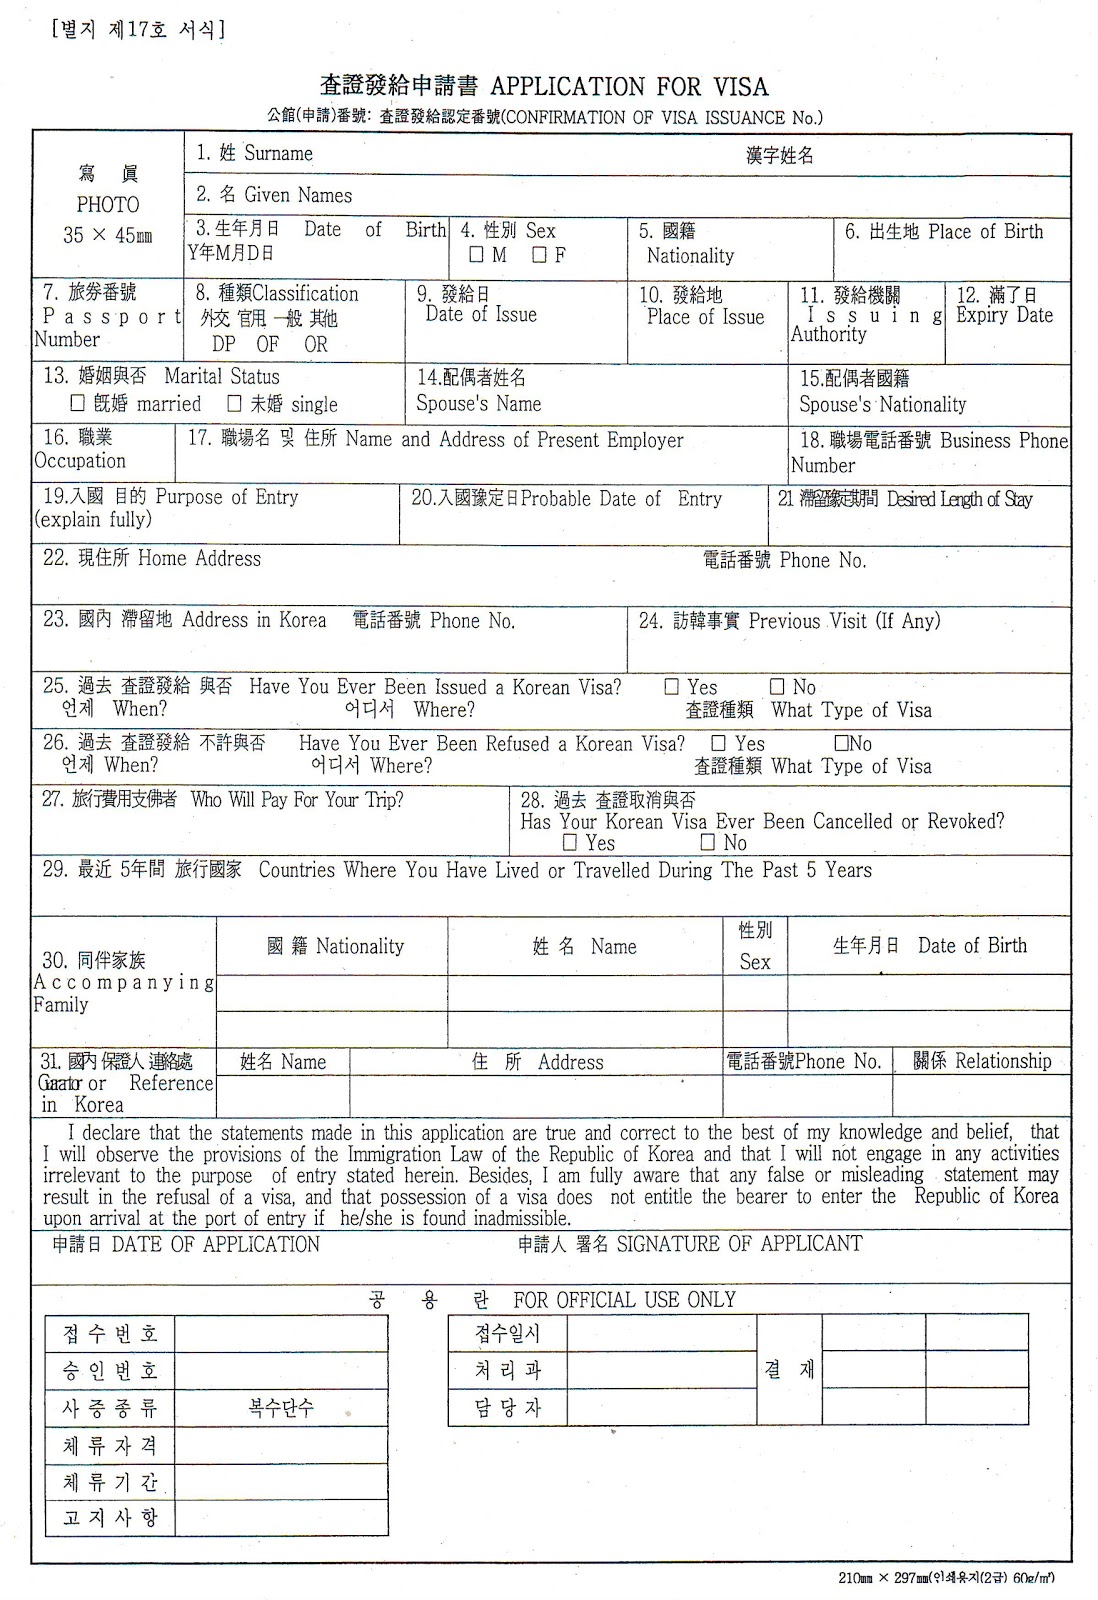 Here's the visa application form for South Korea in the Philippines :